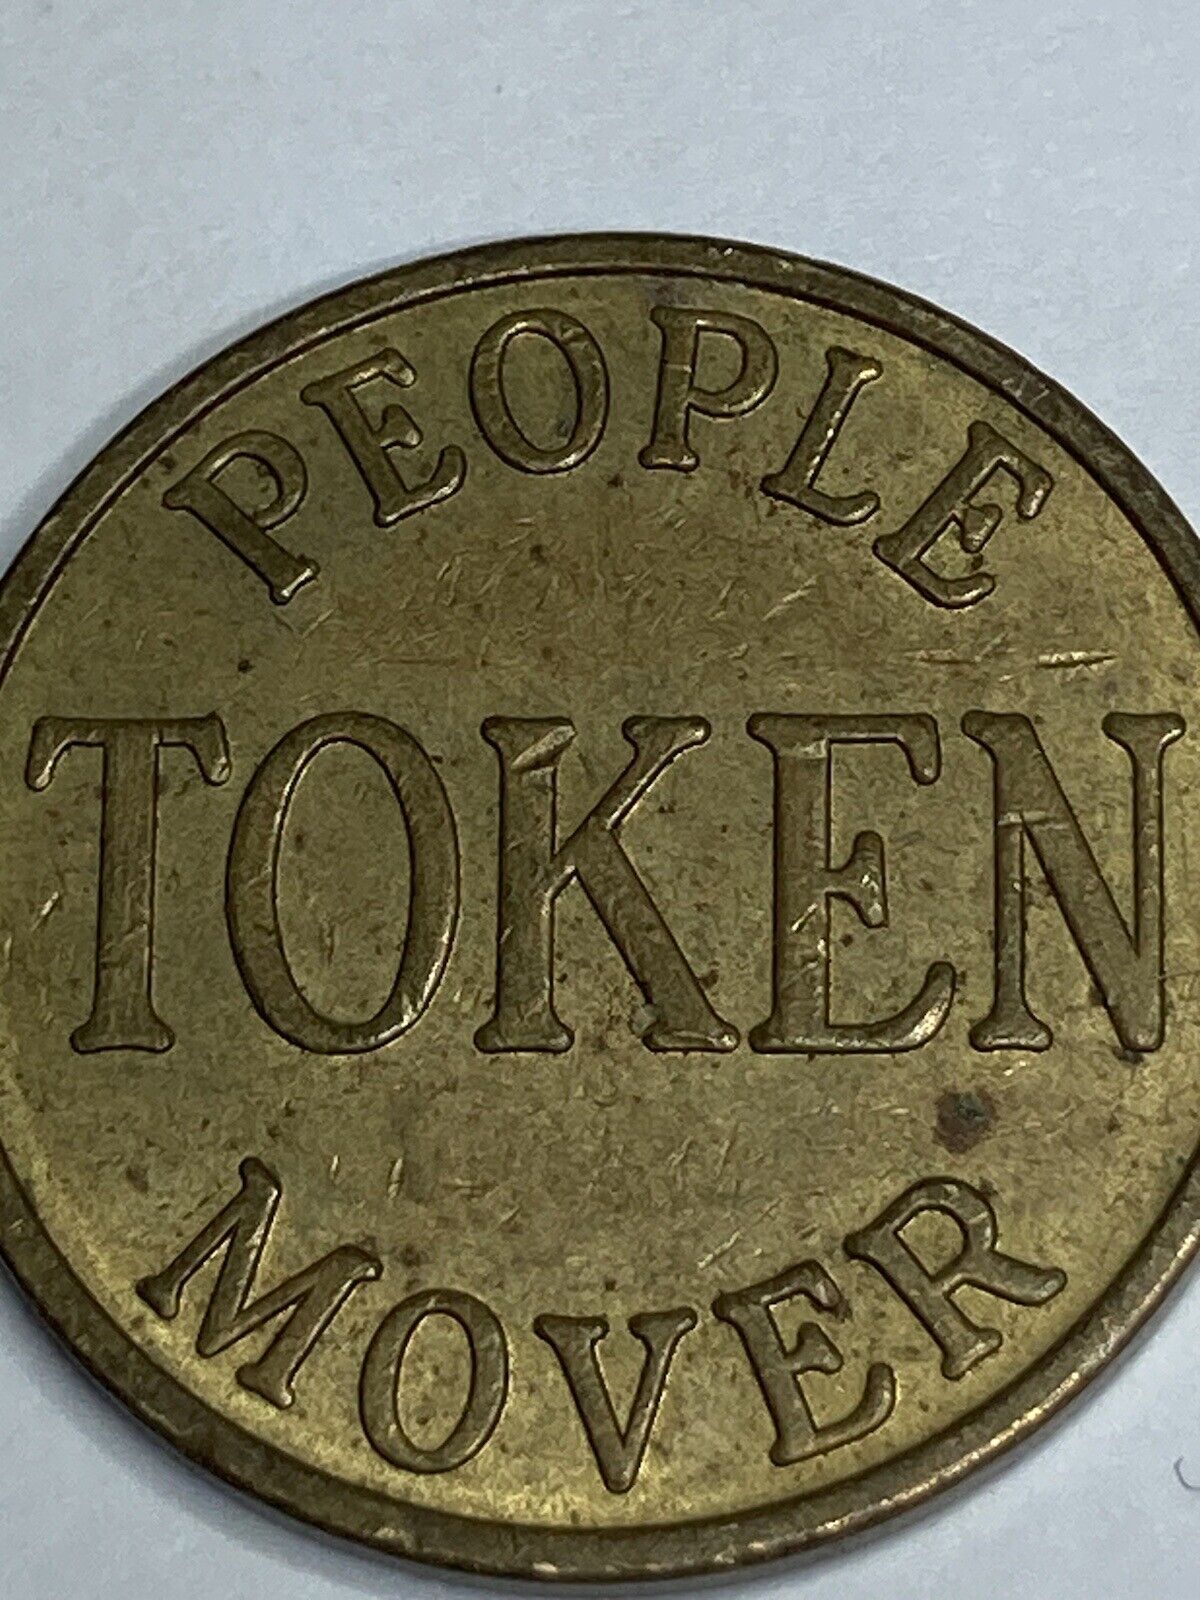 VINTAGE HARBOUR ISLAND TAMPA FLORIDA PEOPLE MOVER BRASS TOKEN OBSOLETE #qf1